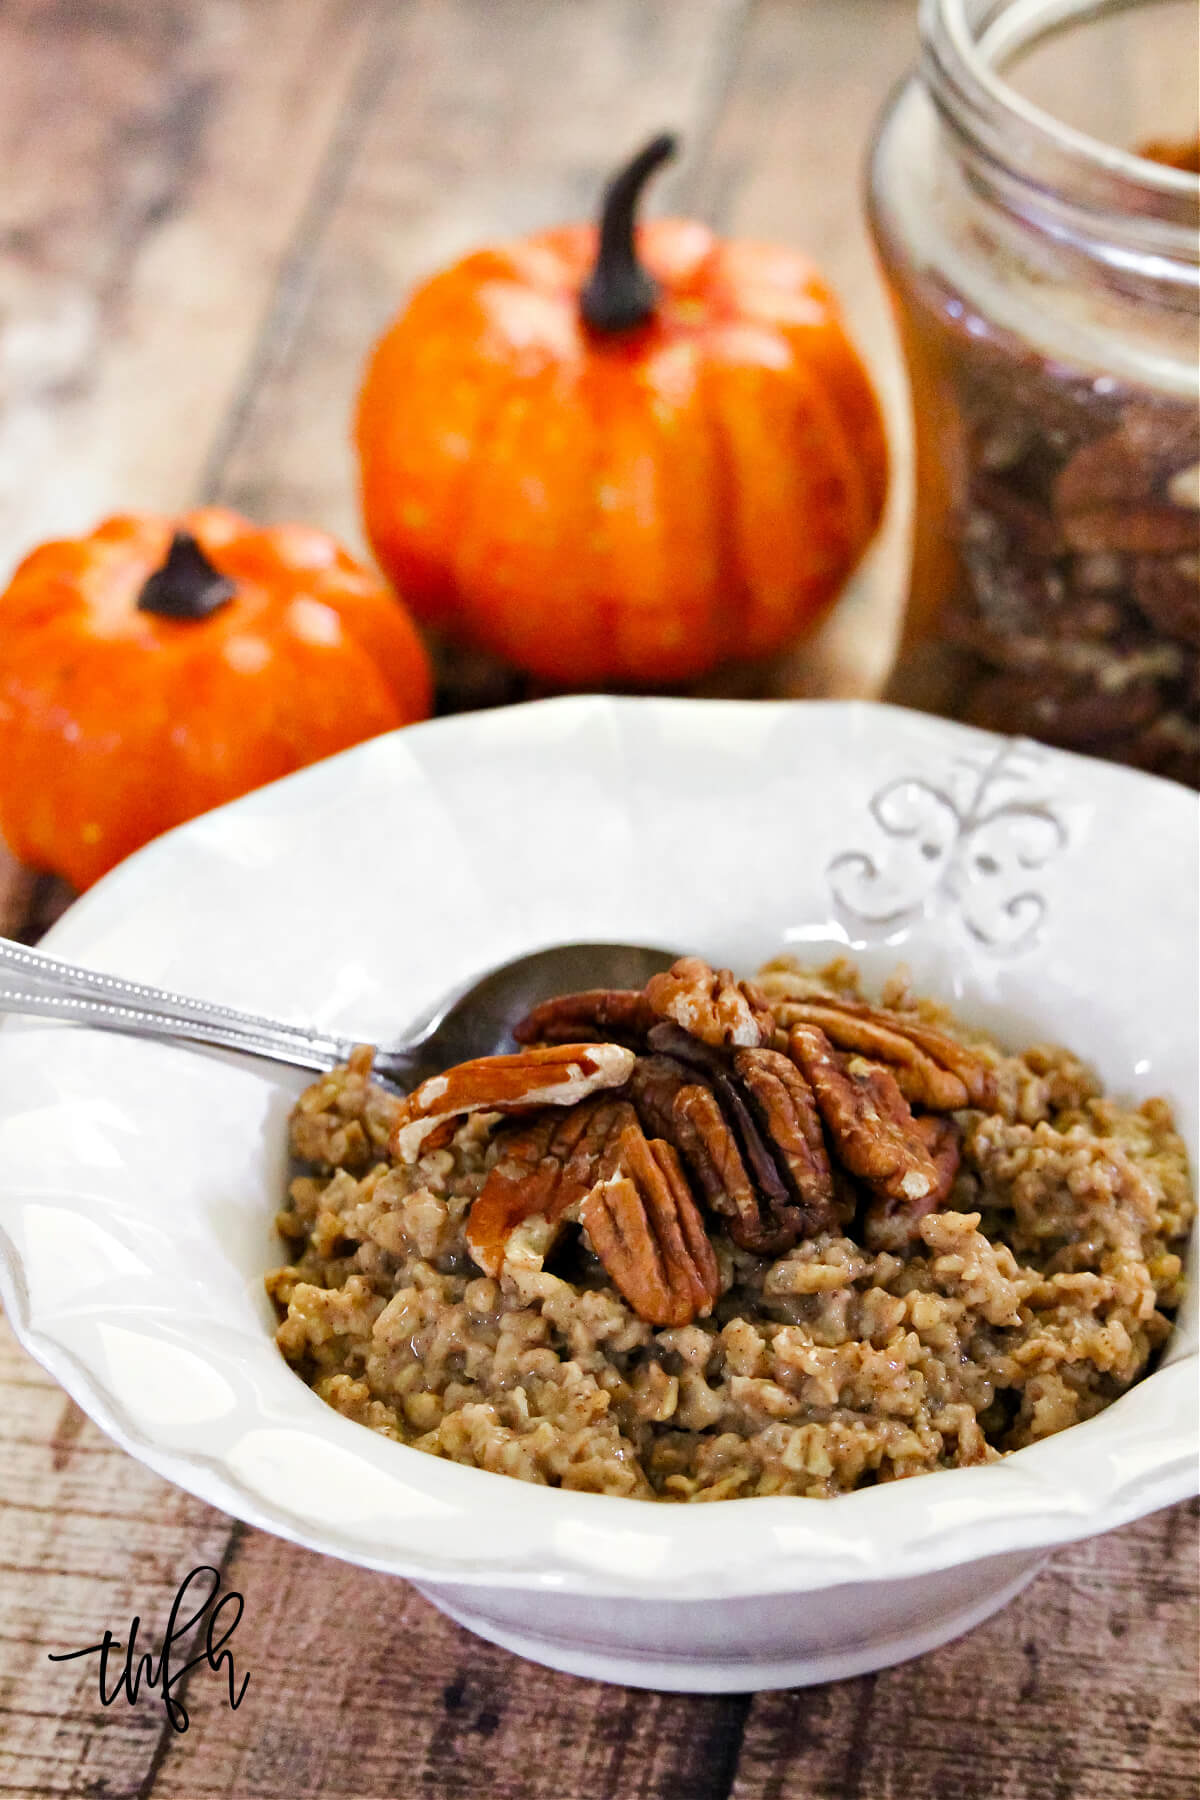 Vertical image of a white bowl of oatmeal next to two small pumpkins on a weathered wood surface